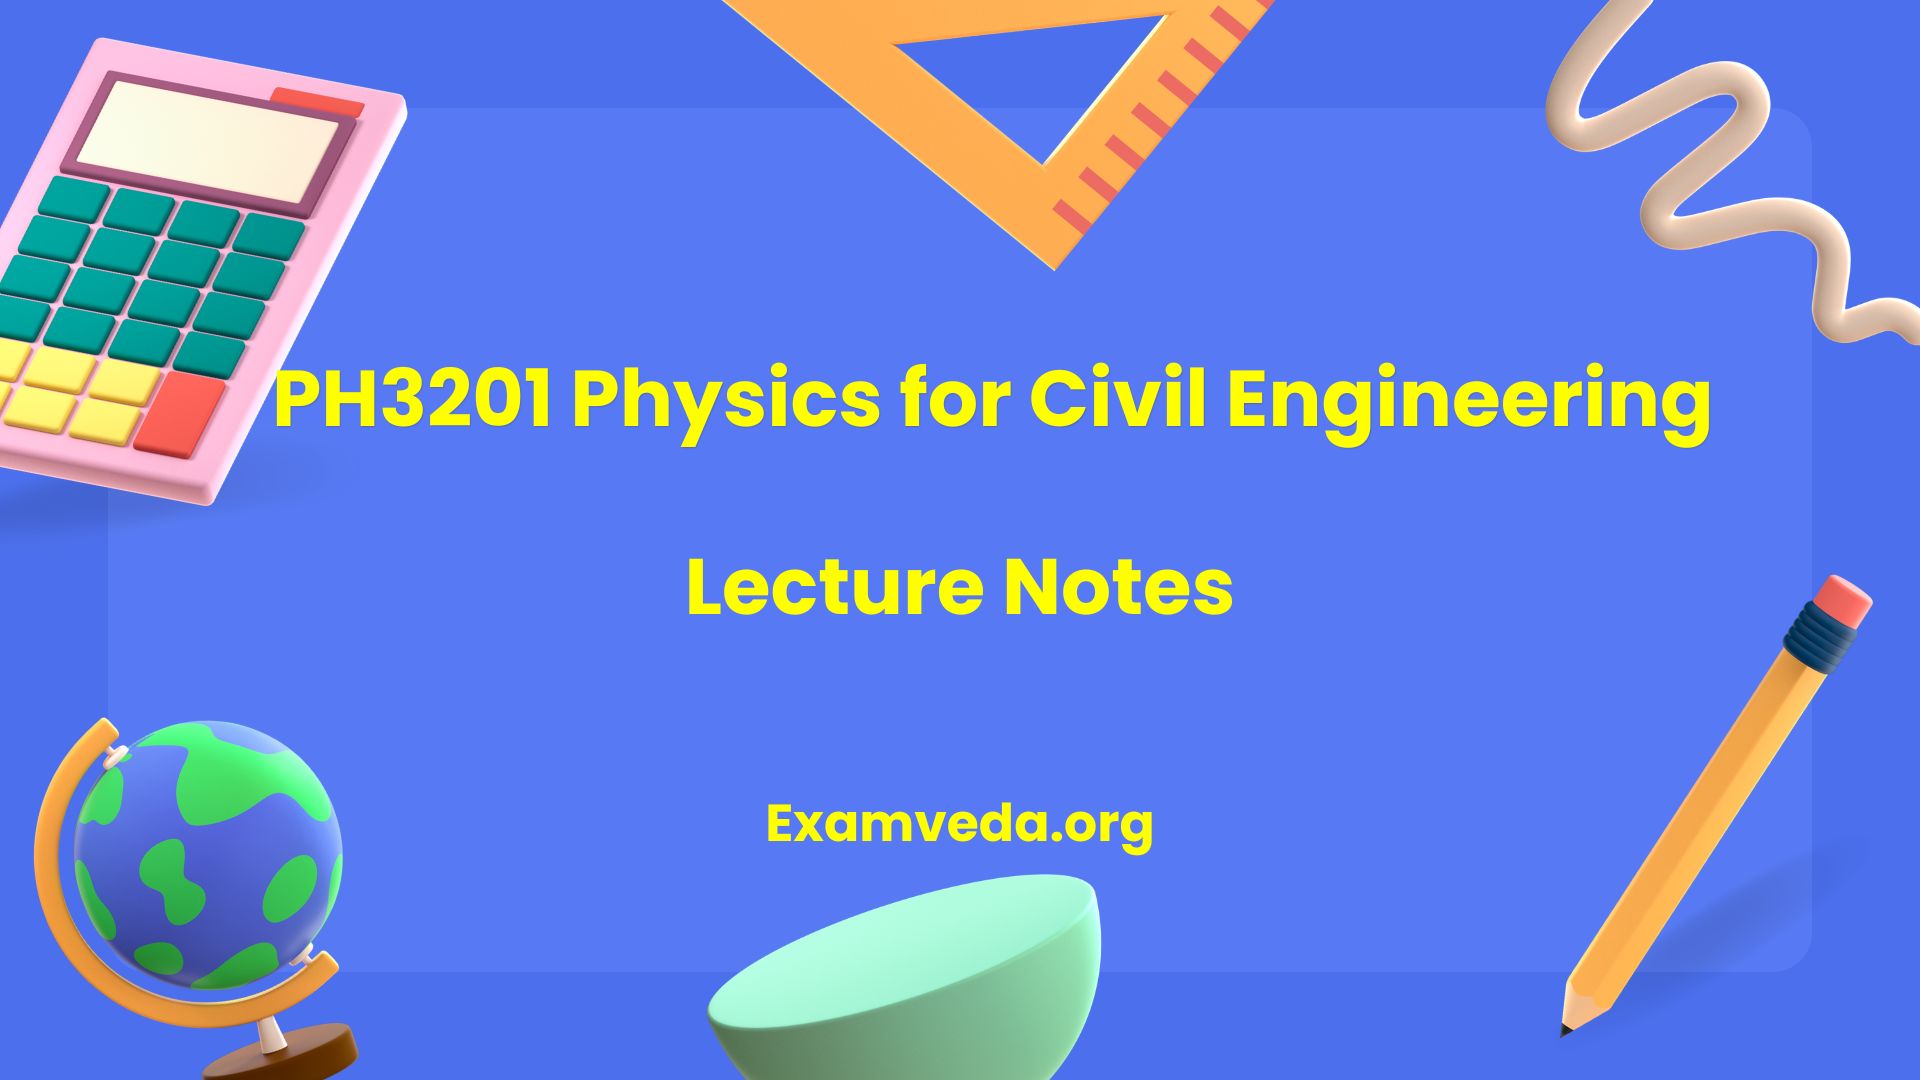 PH3201 Physics for Civil Engineering Lecture Notes